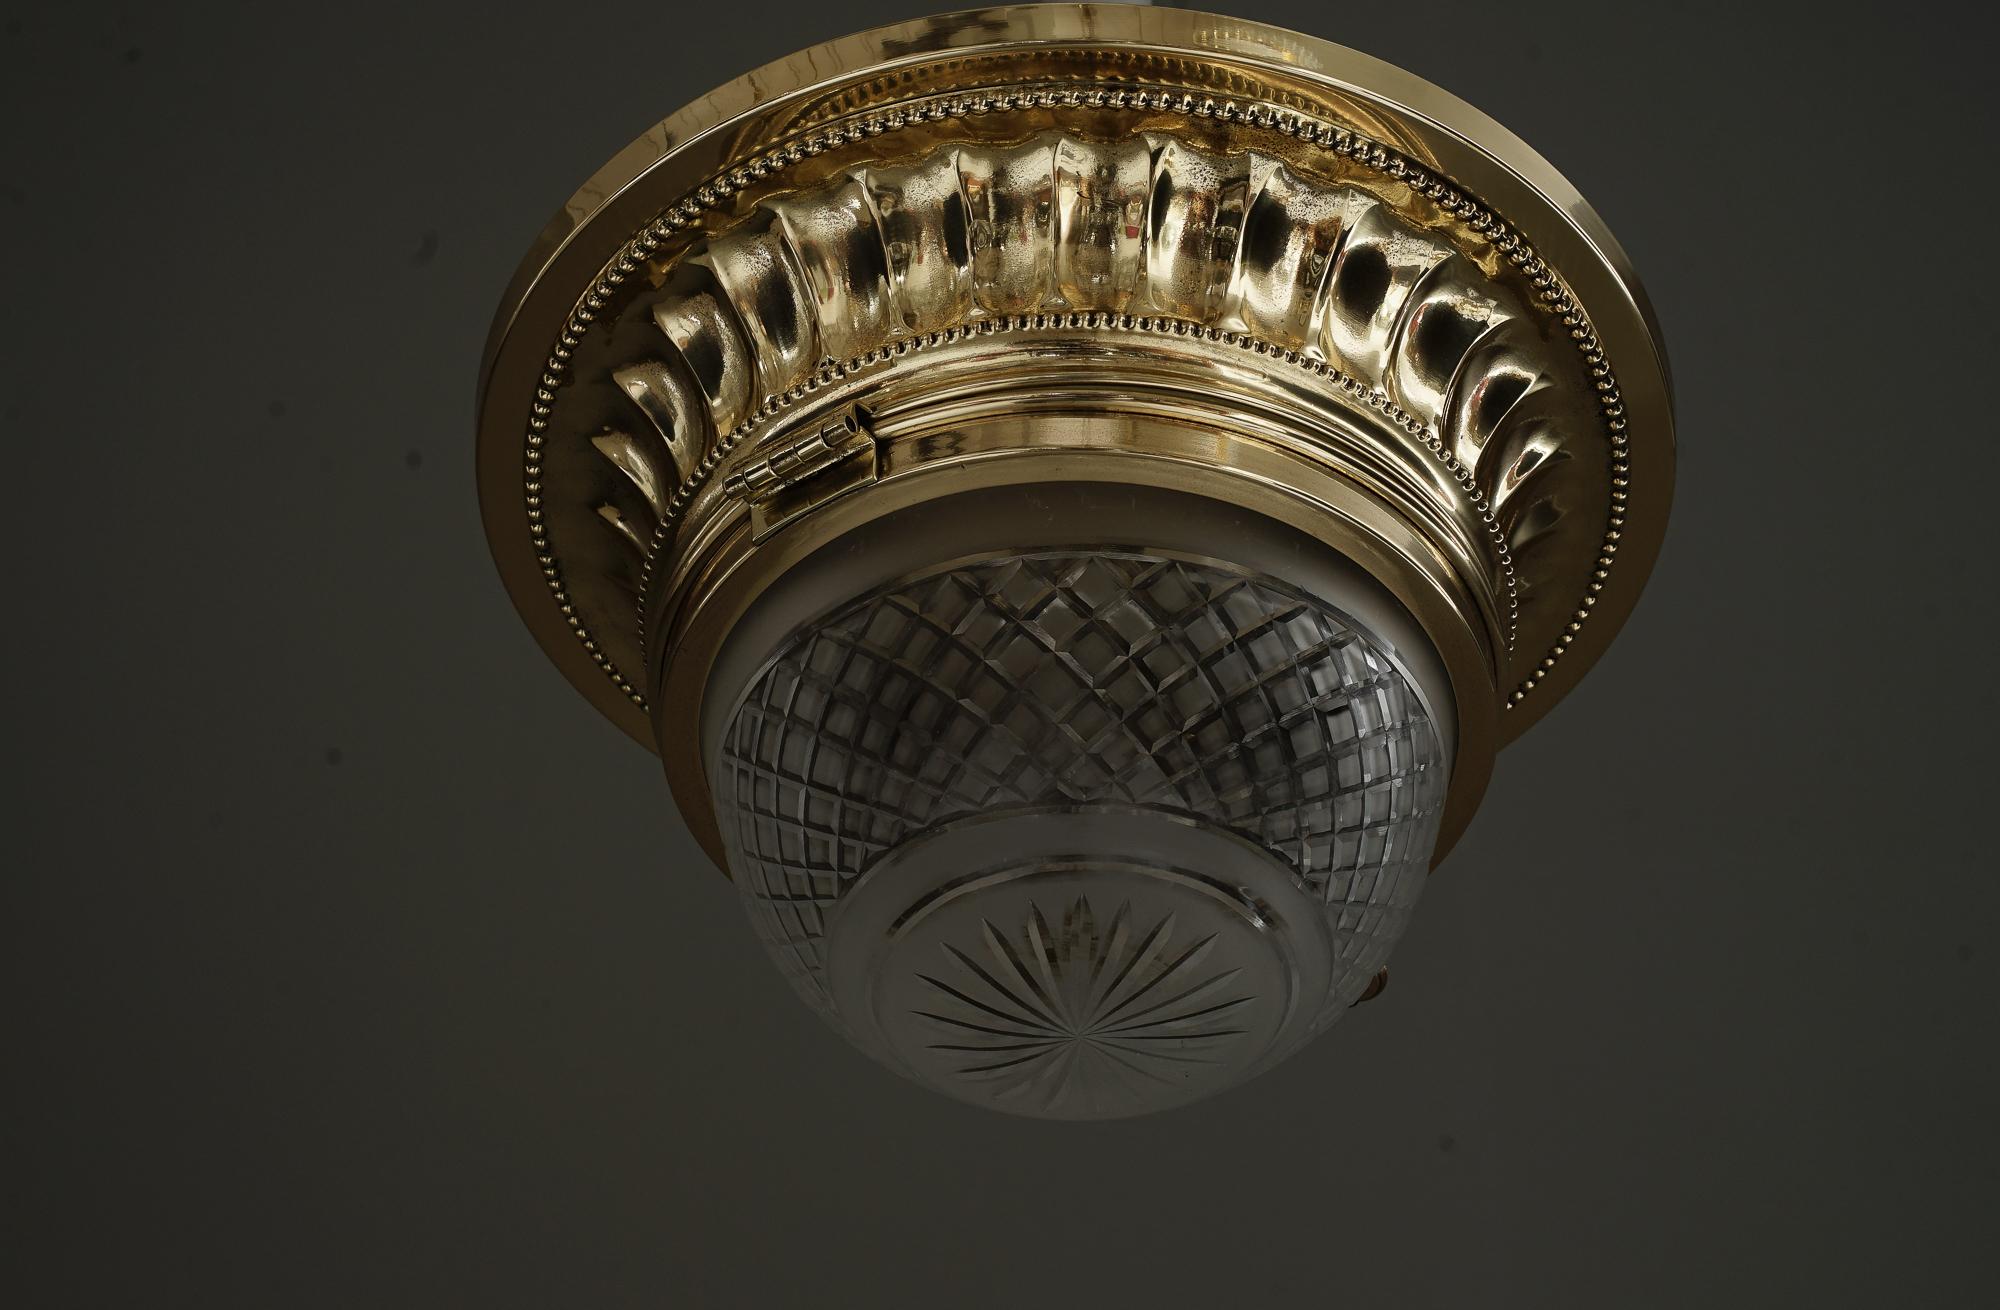 Art Deco ceiling lamp with cut glass shade vienna around 1920s
Polished and stove nenameled
Original cut glass shade.